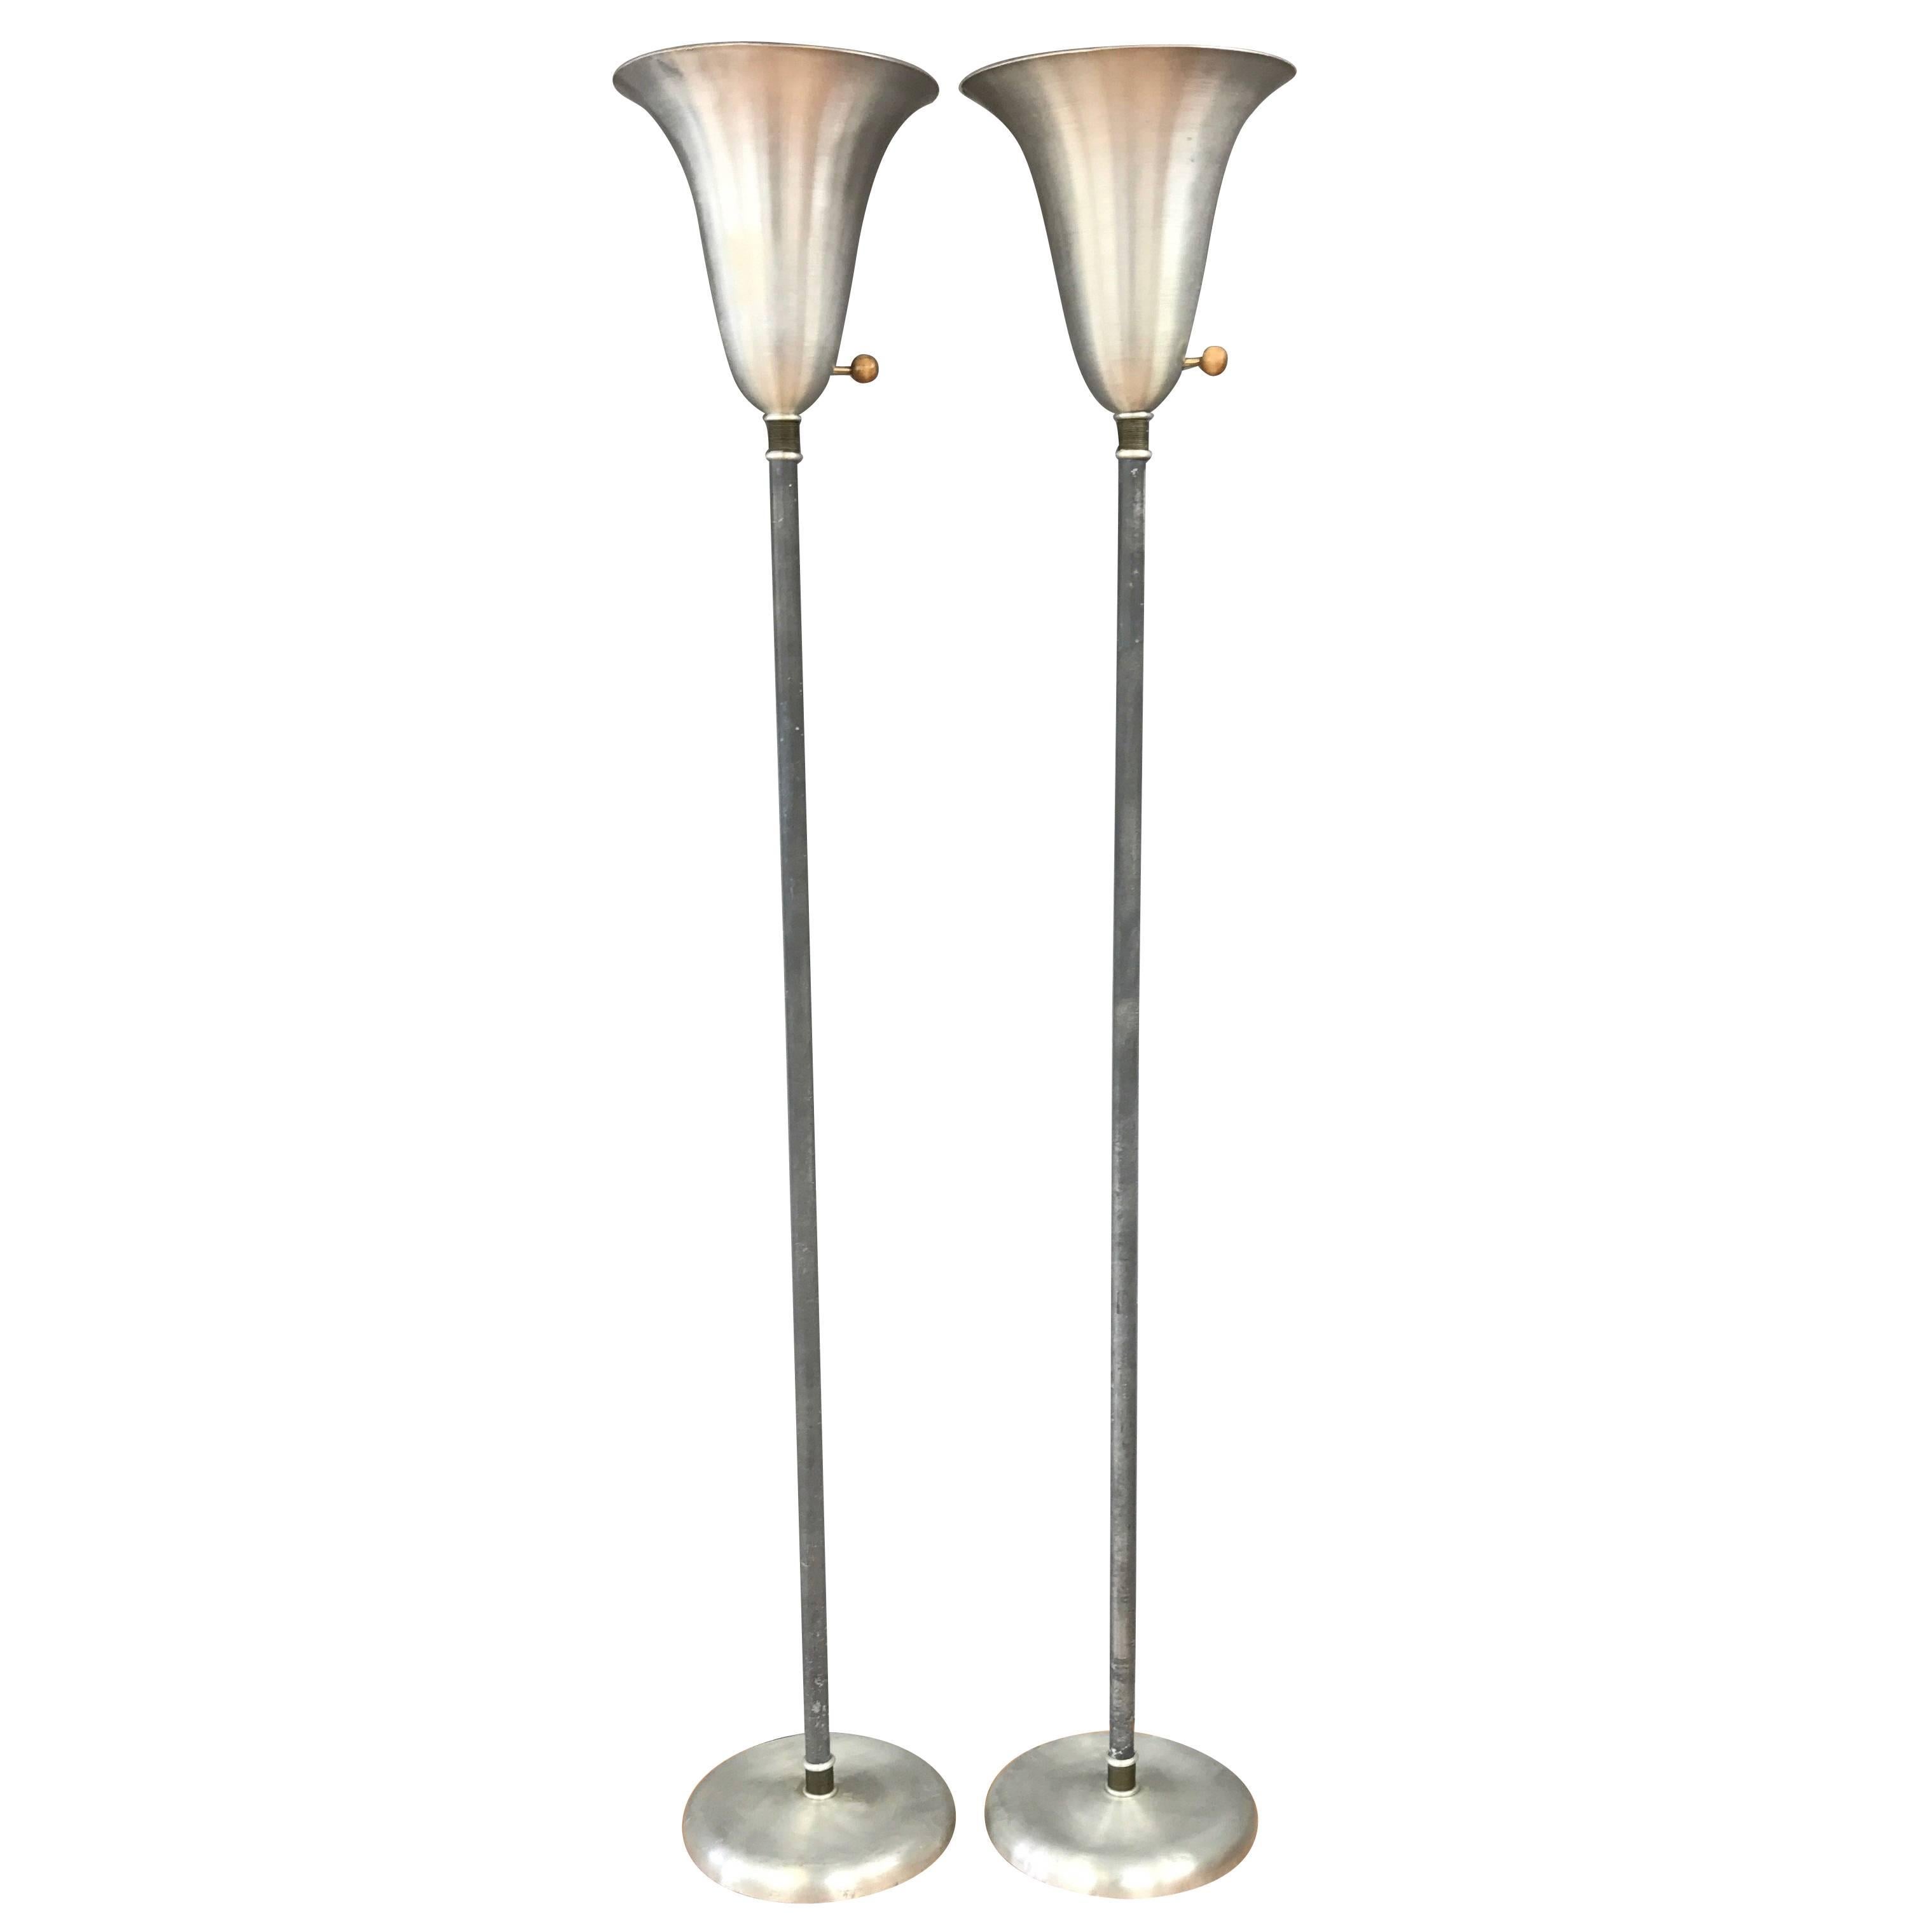 Pair of Russel Wright American Modern Aluminium and Brass Torchieres For Sale